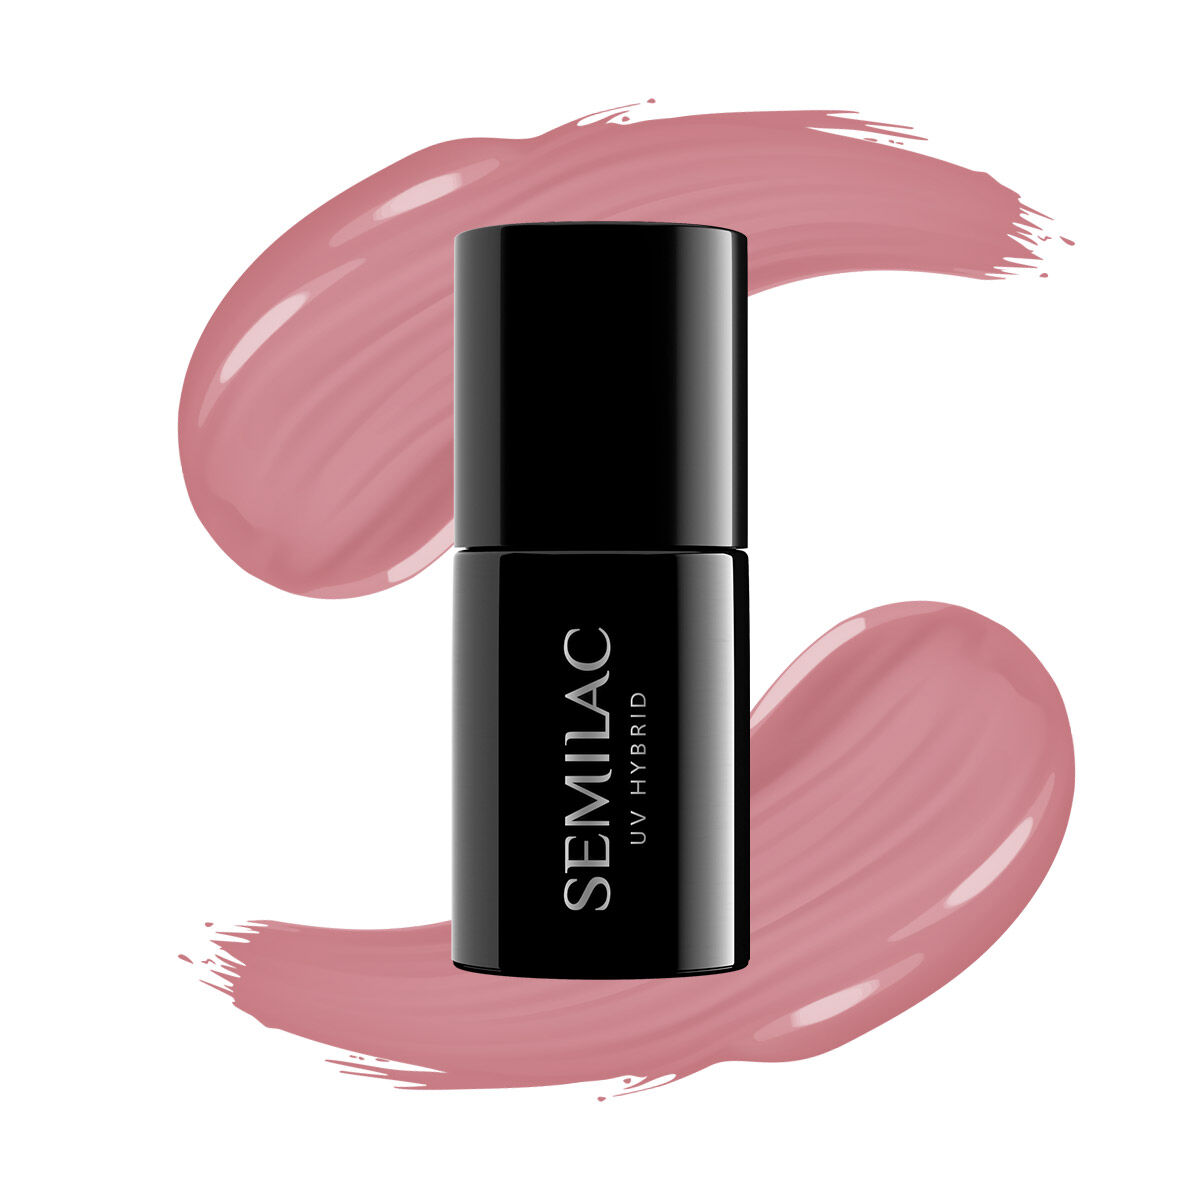 SEMILAC Extend 5in1 - 7 ml - No. 818 Brown Pink